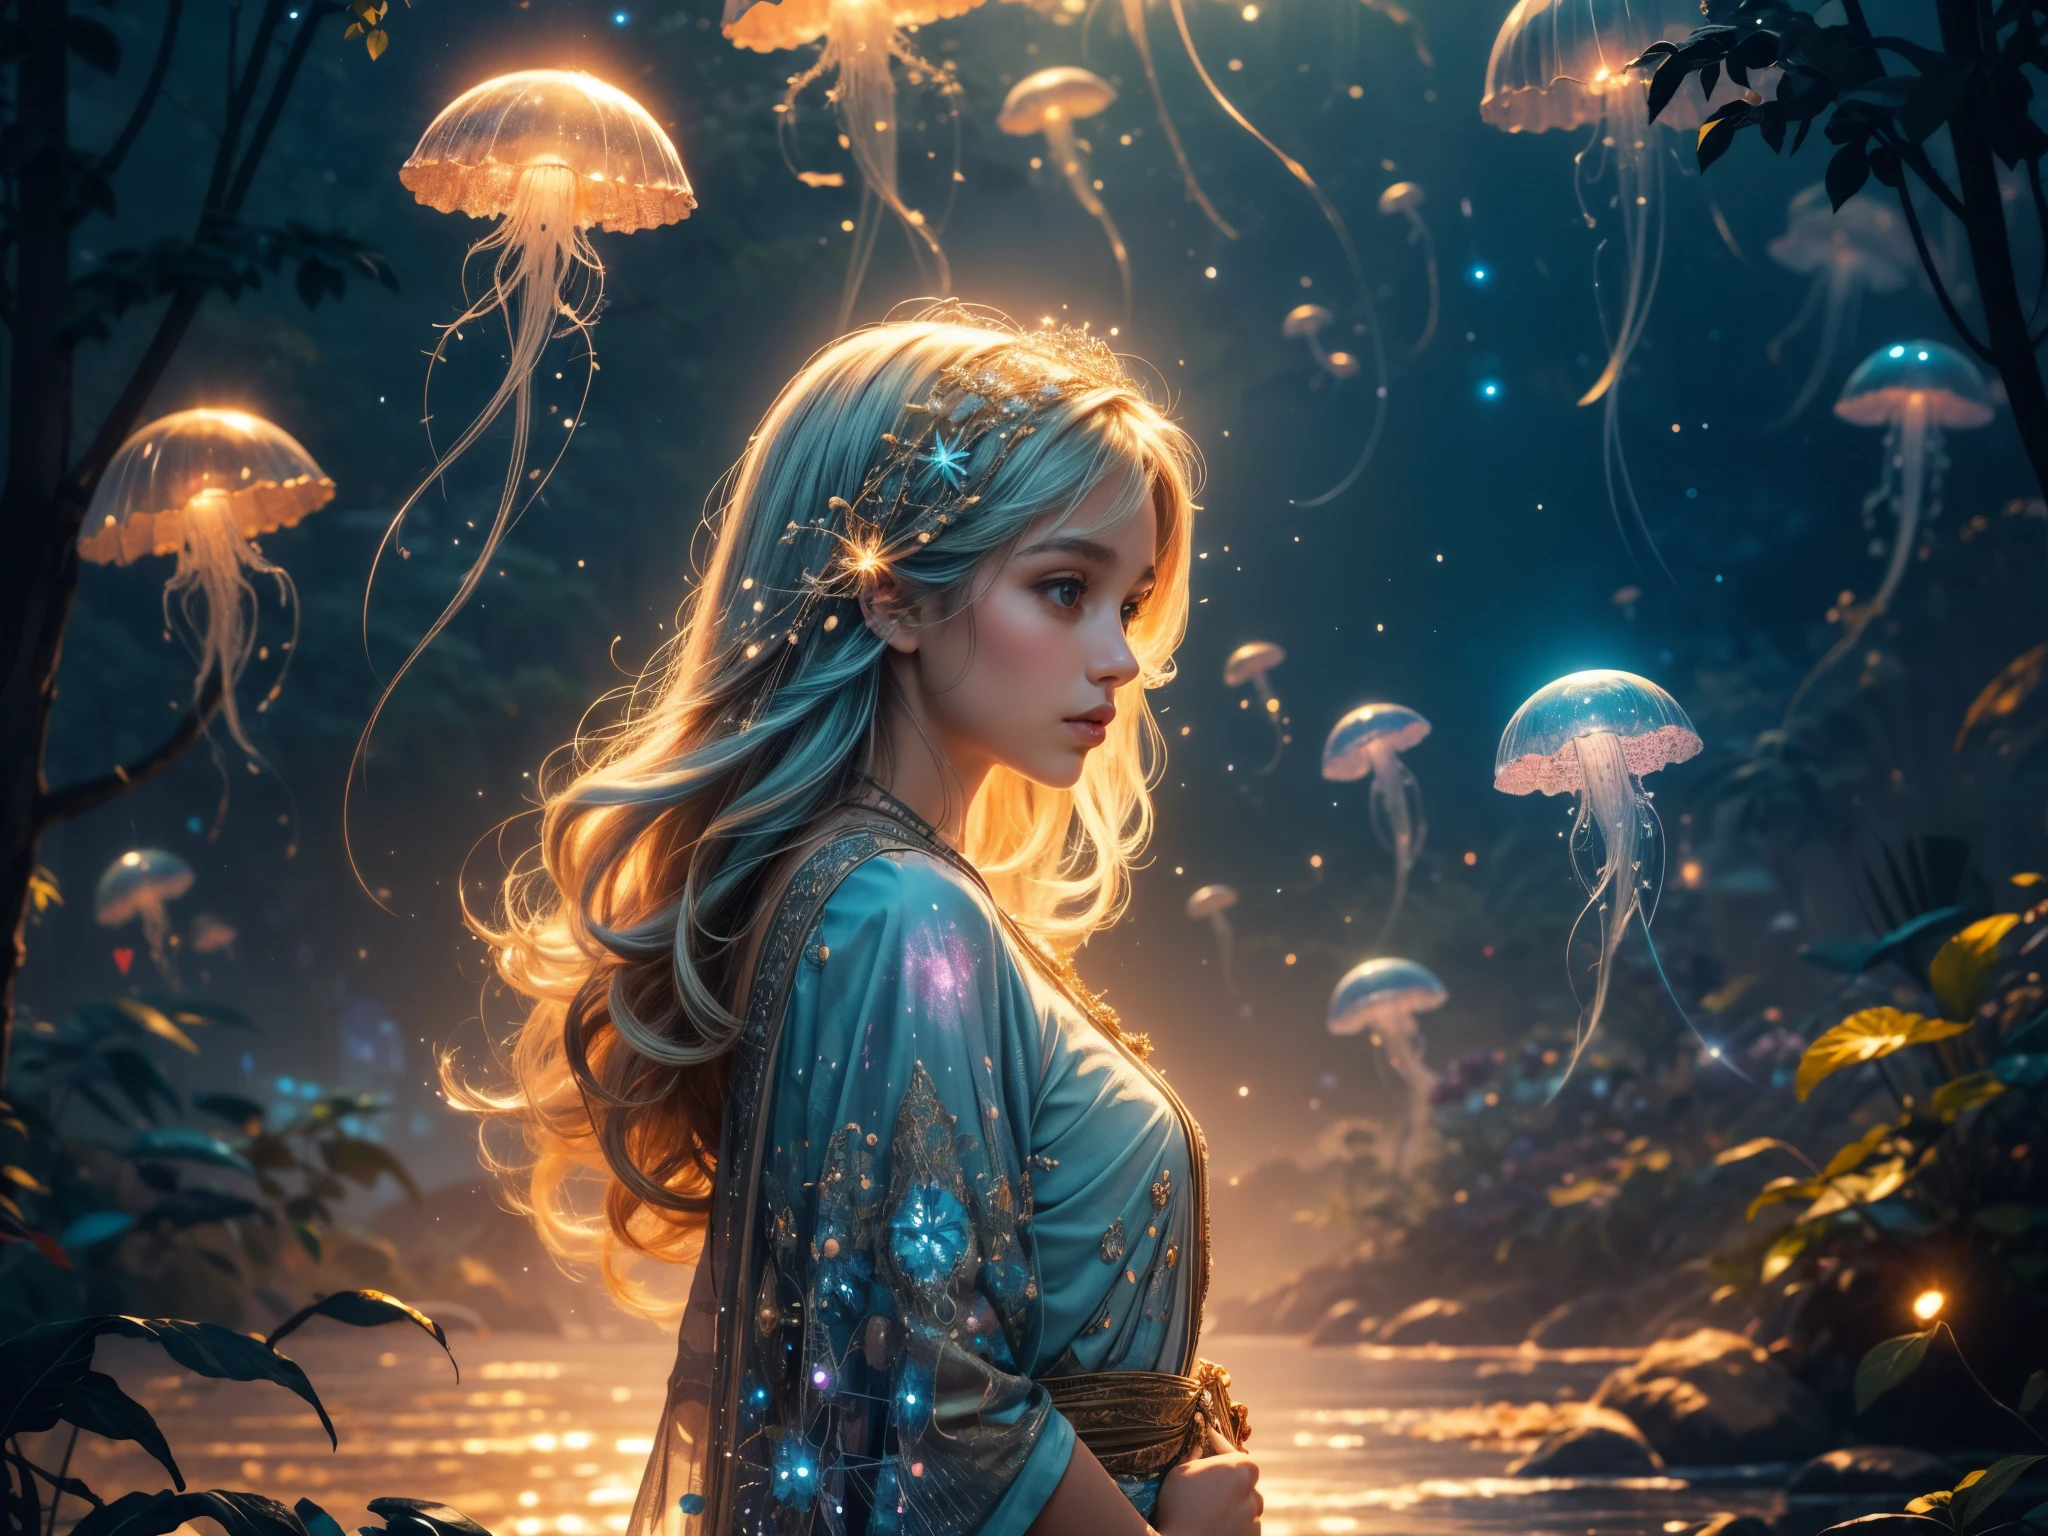 (best quality,4k,8k,highres,masterpiece:1.2), ultra-detailed, (realistic, photorealistic, photo-realistic:1.37), HDR, painting, portraits, vivid colors, sharp focus, bokeh, studio lighting,
A girl playing with rainbow jellyfishes in the vast universe. The girl has beautiful detailed eyes, lips, and an expression of awe. She is mesmerized by the glowing jellyfishes floating around her. The jellyfishes have iridescent tentacles and vibrant colors that create a whimsical atmosphere. The girl's hair gently sways with the current of stardust that fills the surroundings. The universe, with its millions of stars, serves as the backdrop, casting a soft, ethereal light on the scene. The colors are vivid and full of life, creating a dreamlike aesthetic.